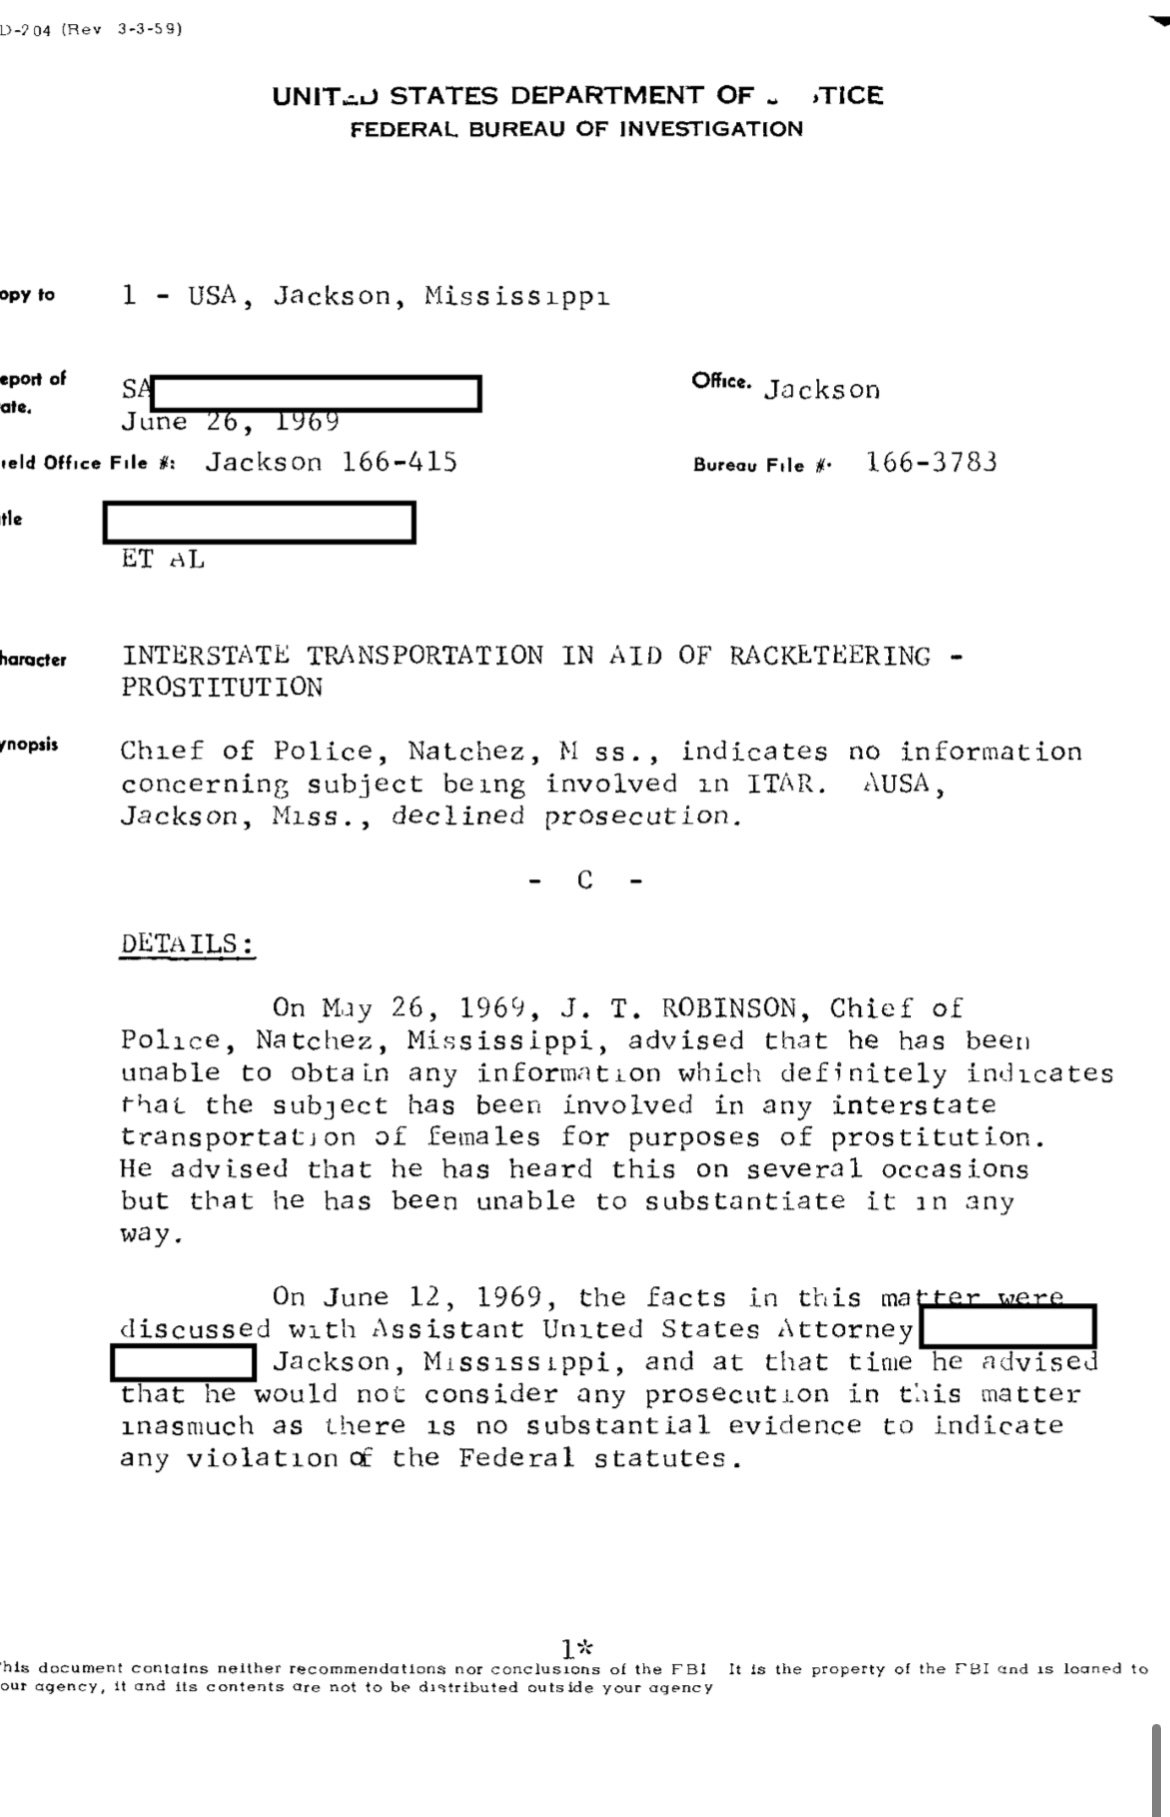 Late 60s FBI investigation into Nellie brings no charges.jpg